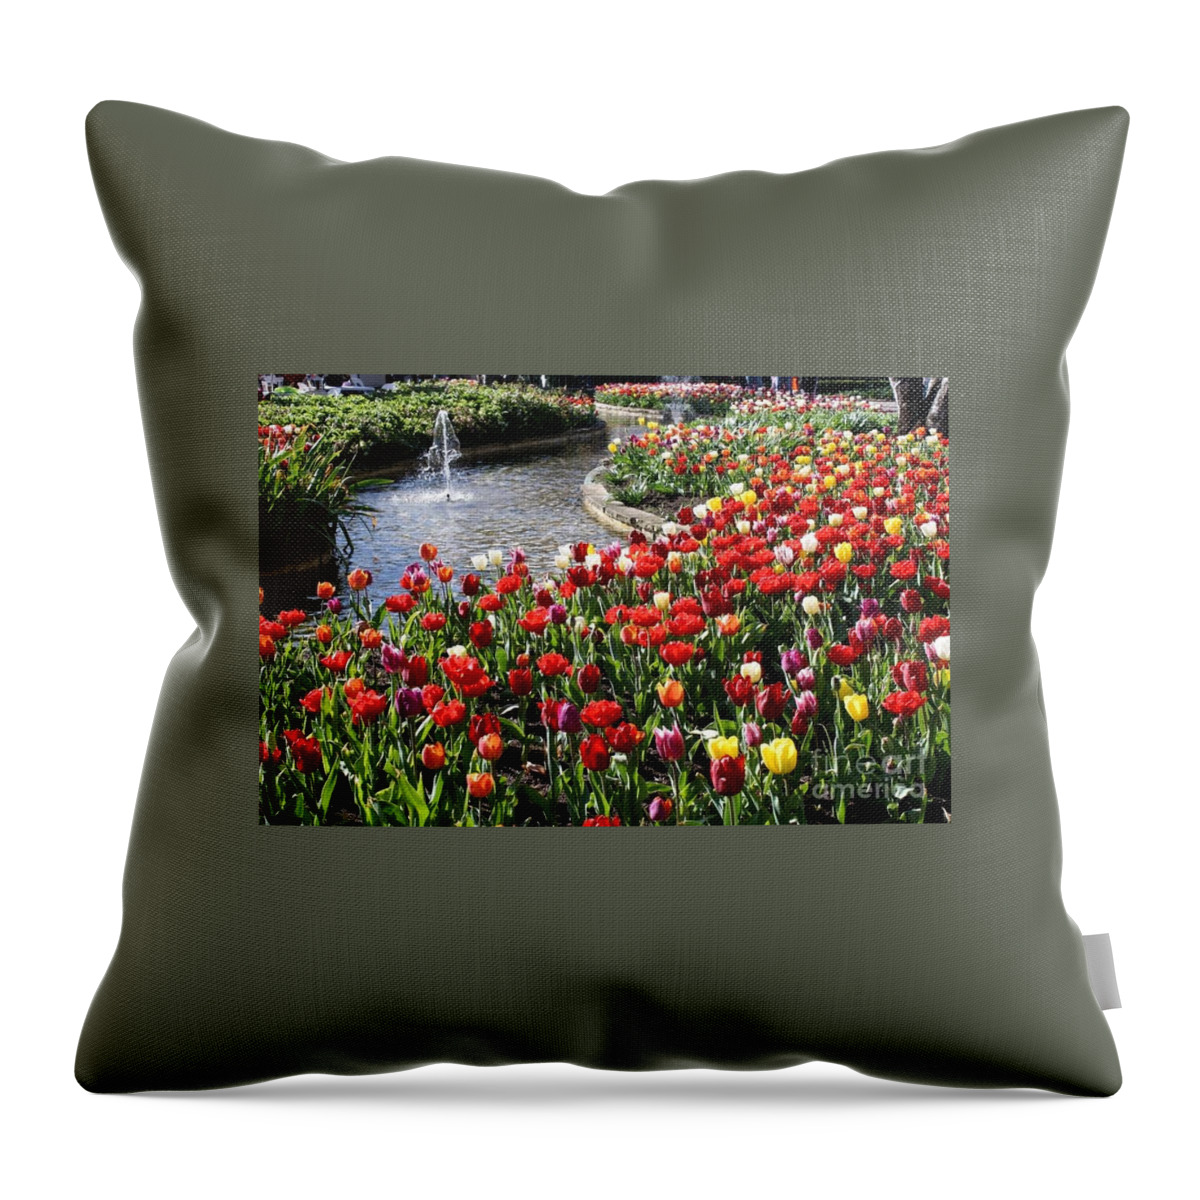 Bowral Tulip Festival Throw Pillow featuring the photograph Tulip Festival by Bev Conover